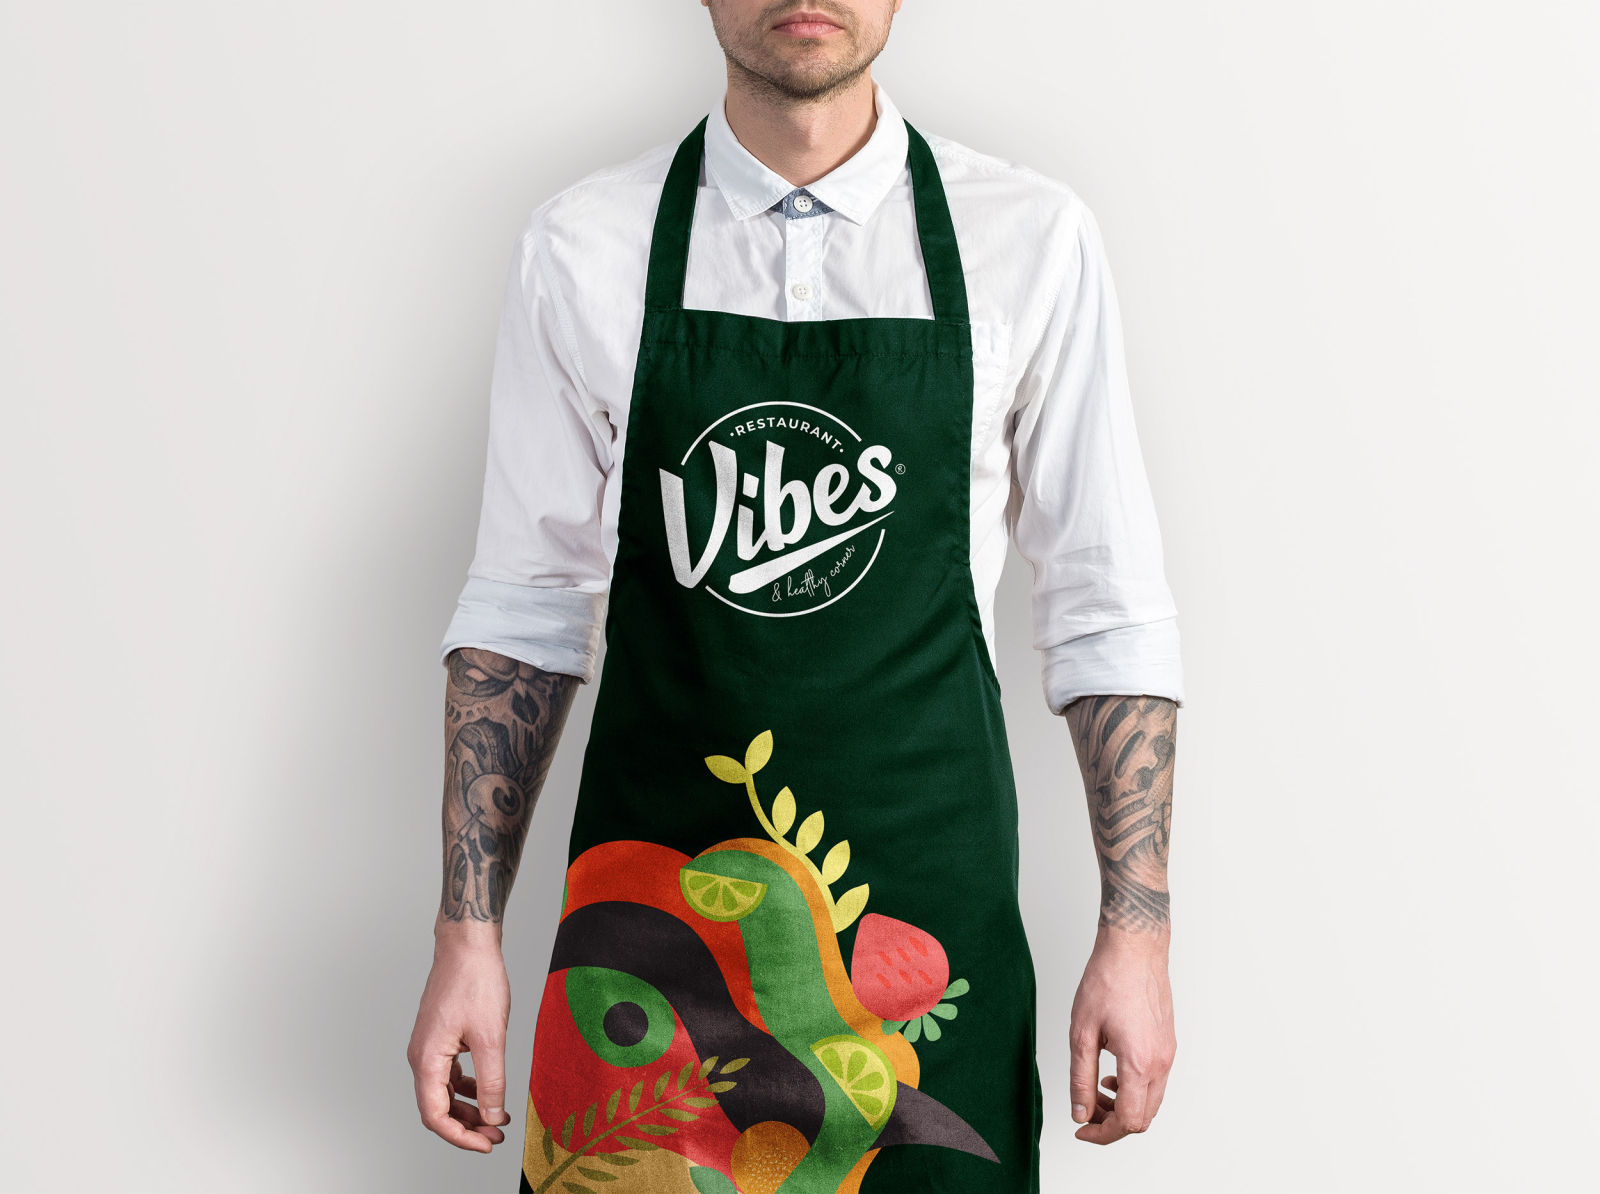 Download Vibes Restaurant Brand Identity by Mockup Cloud on Dribbble